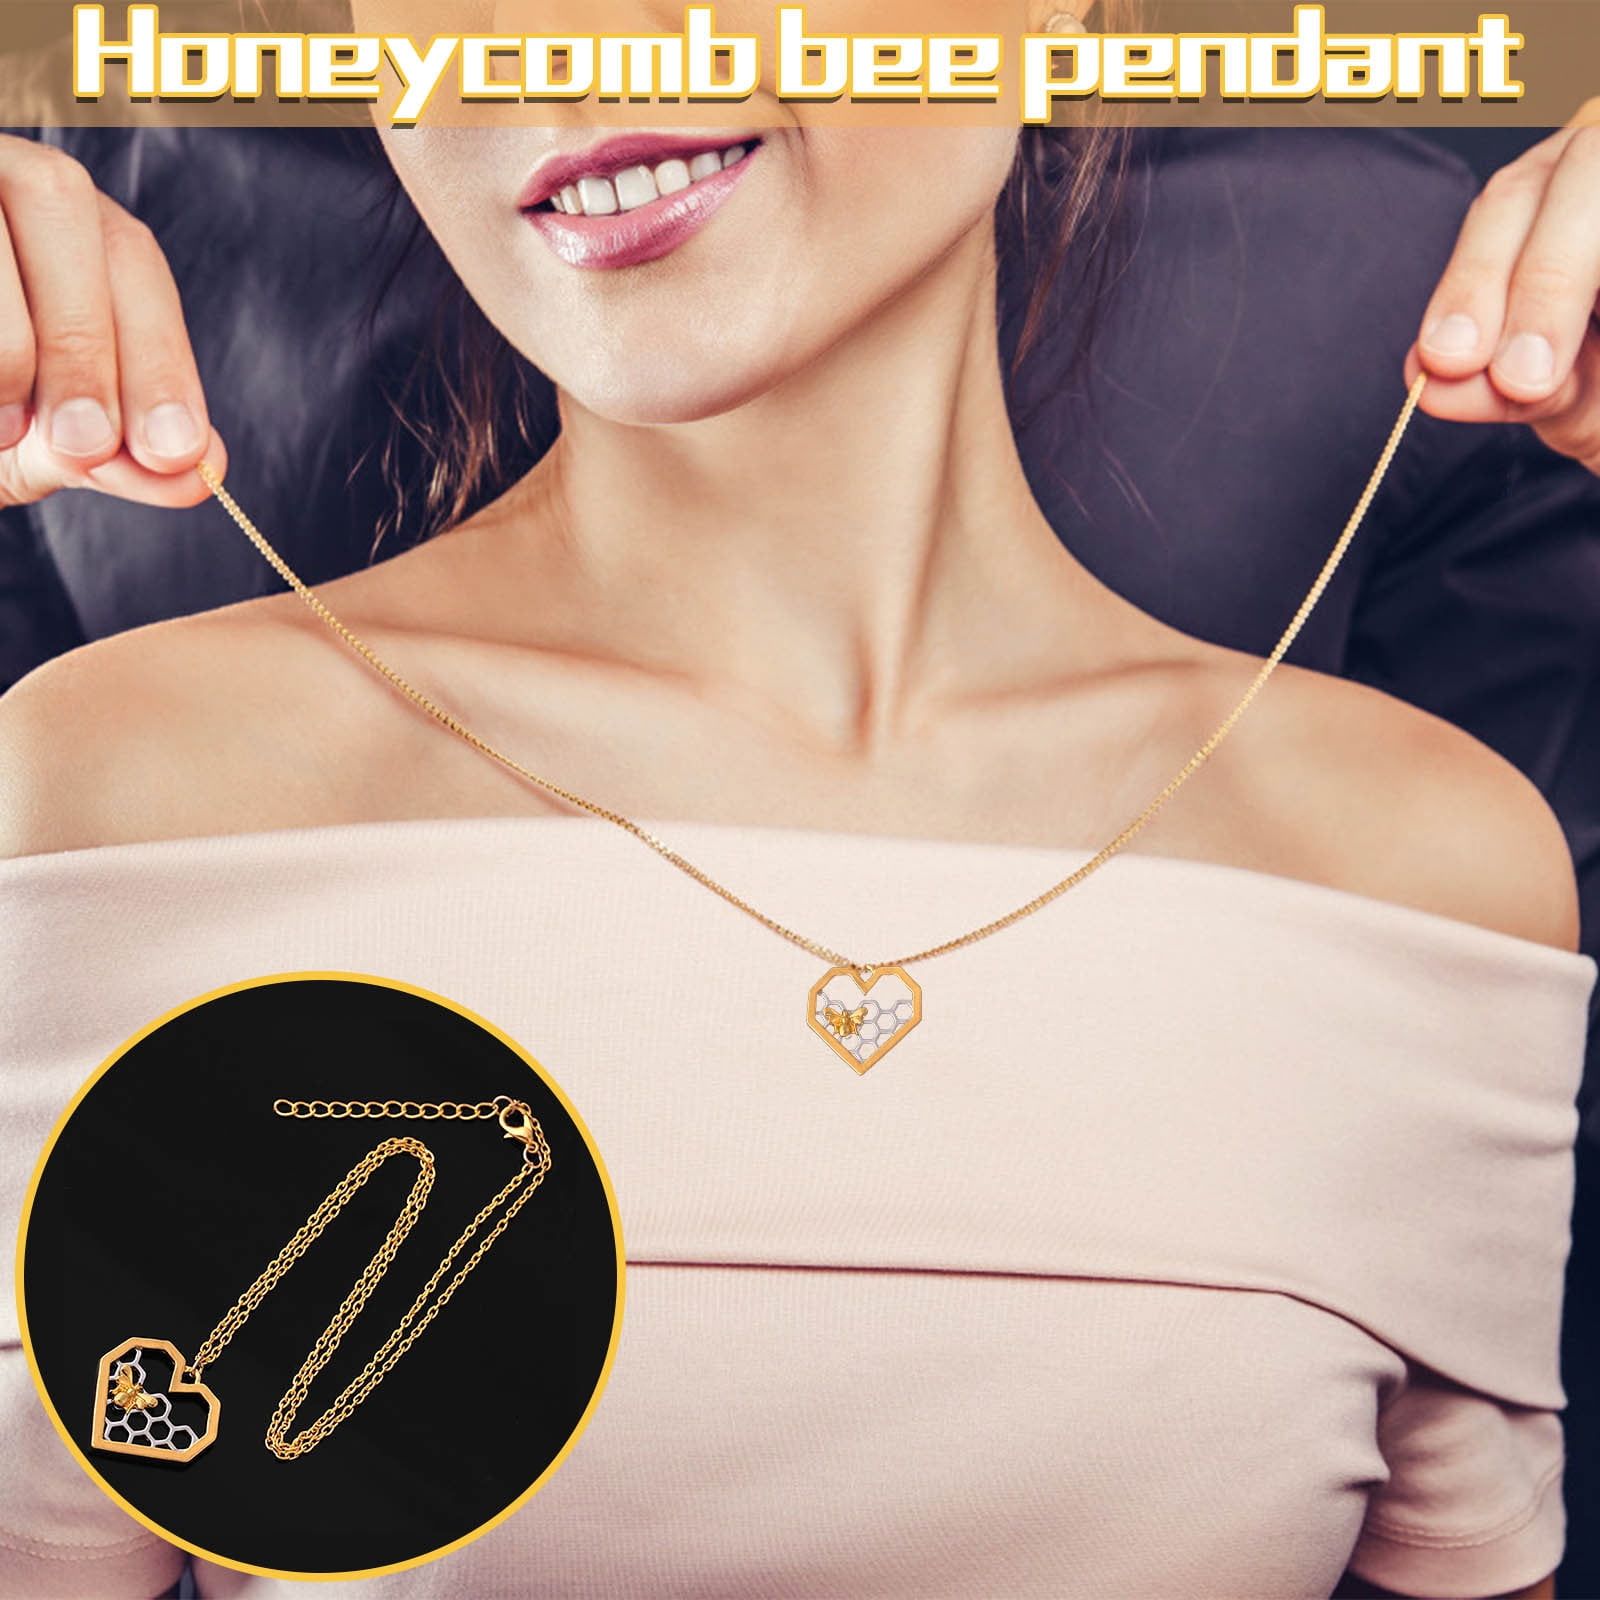 Stylish Delicate Heart Necklace Honeycomb Bee Animal Jewelry Chain Gifts one